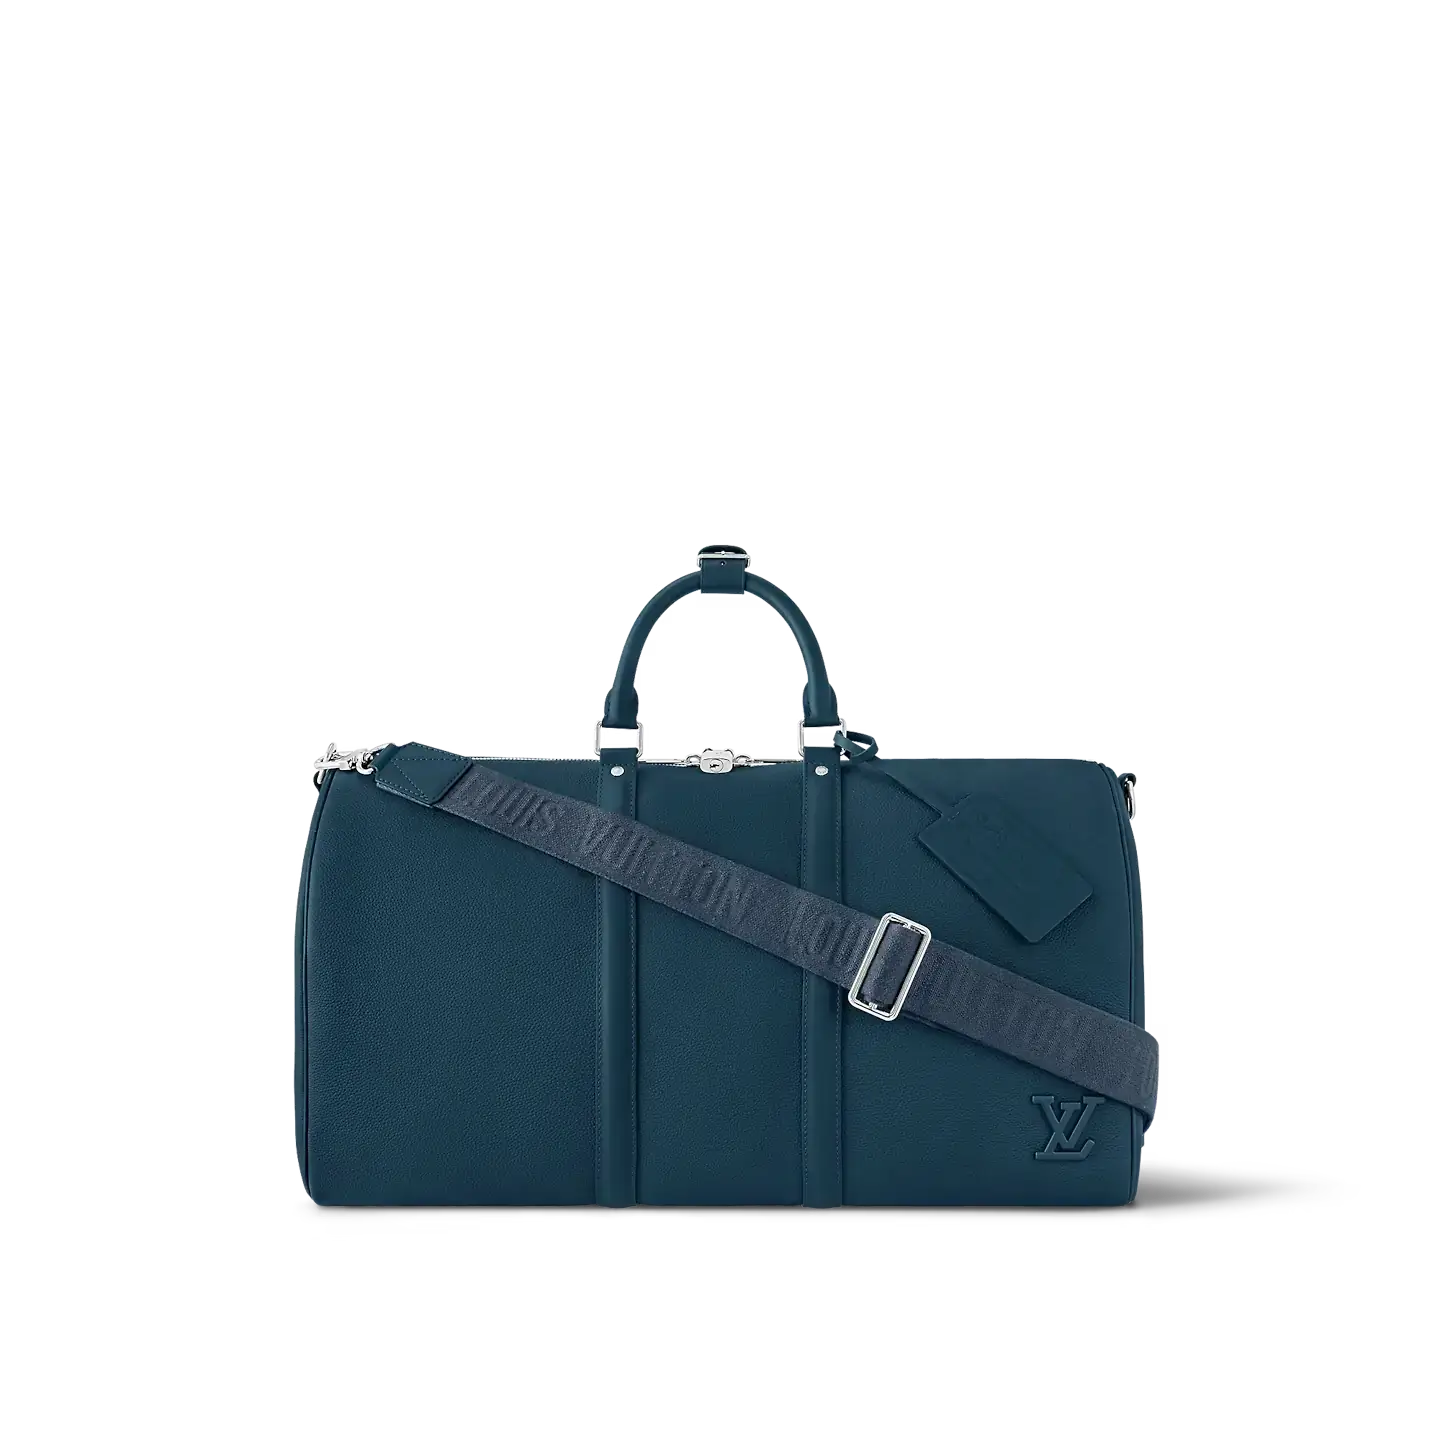 A dark blue Louis Vuitton bag with a structured appearance, featuring a top handle and a removable shoulder strap marked with the “Louis Vuitton” logo.